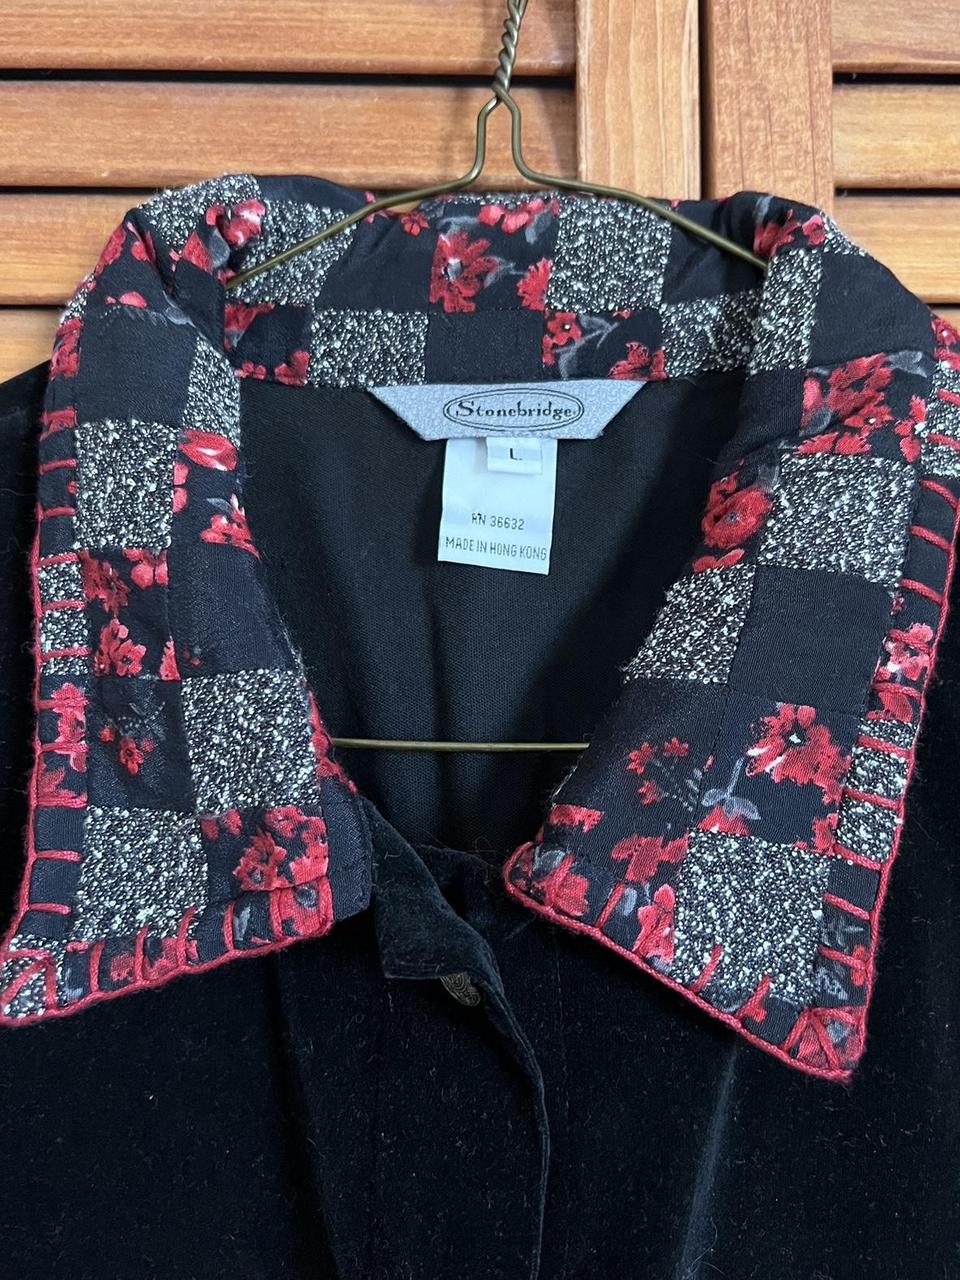 American Vintage Women's Black and Red Jacket (3)